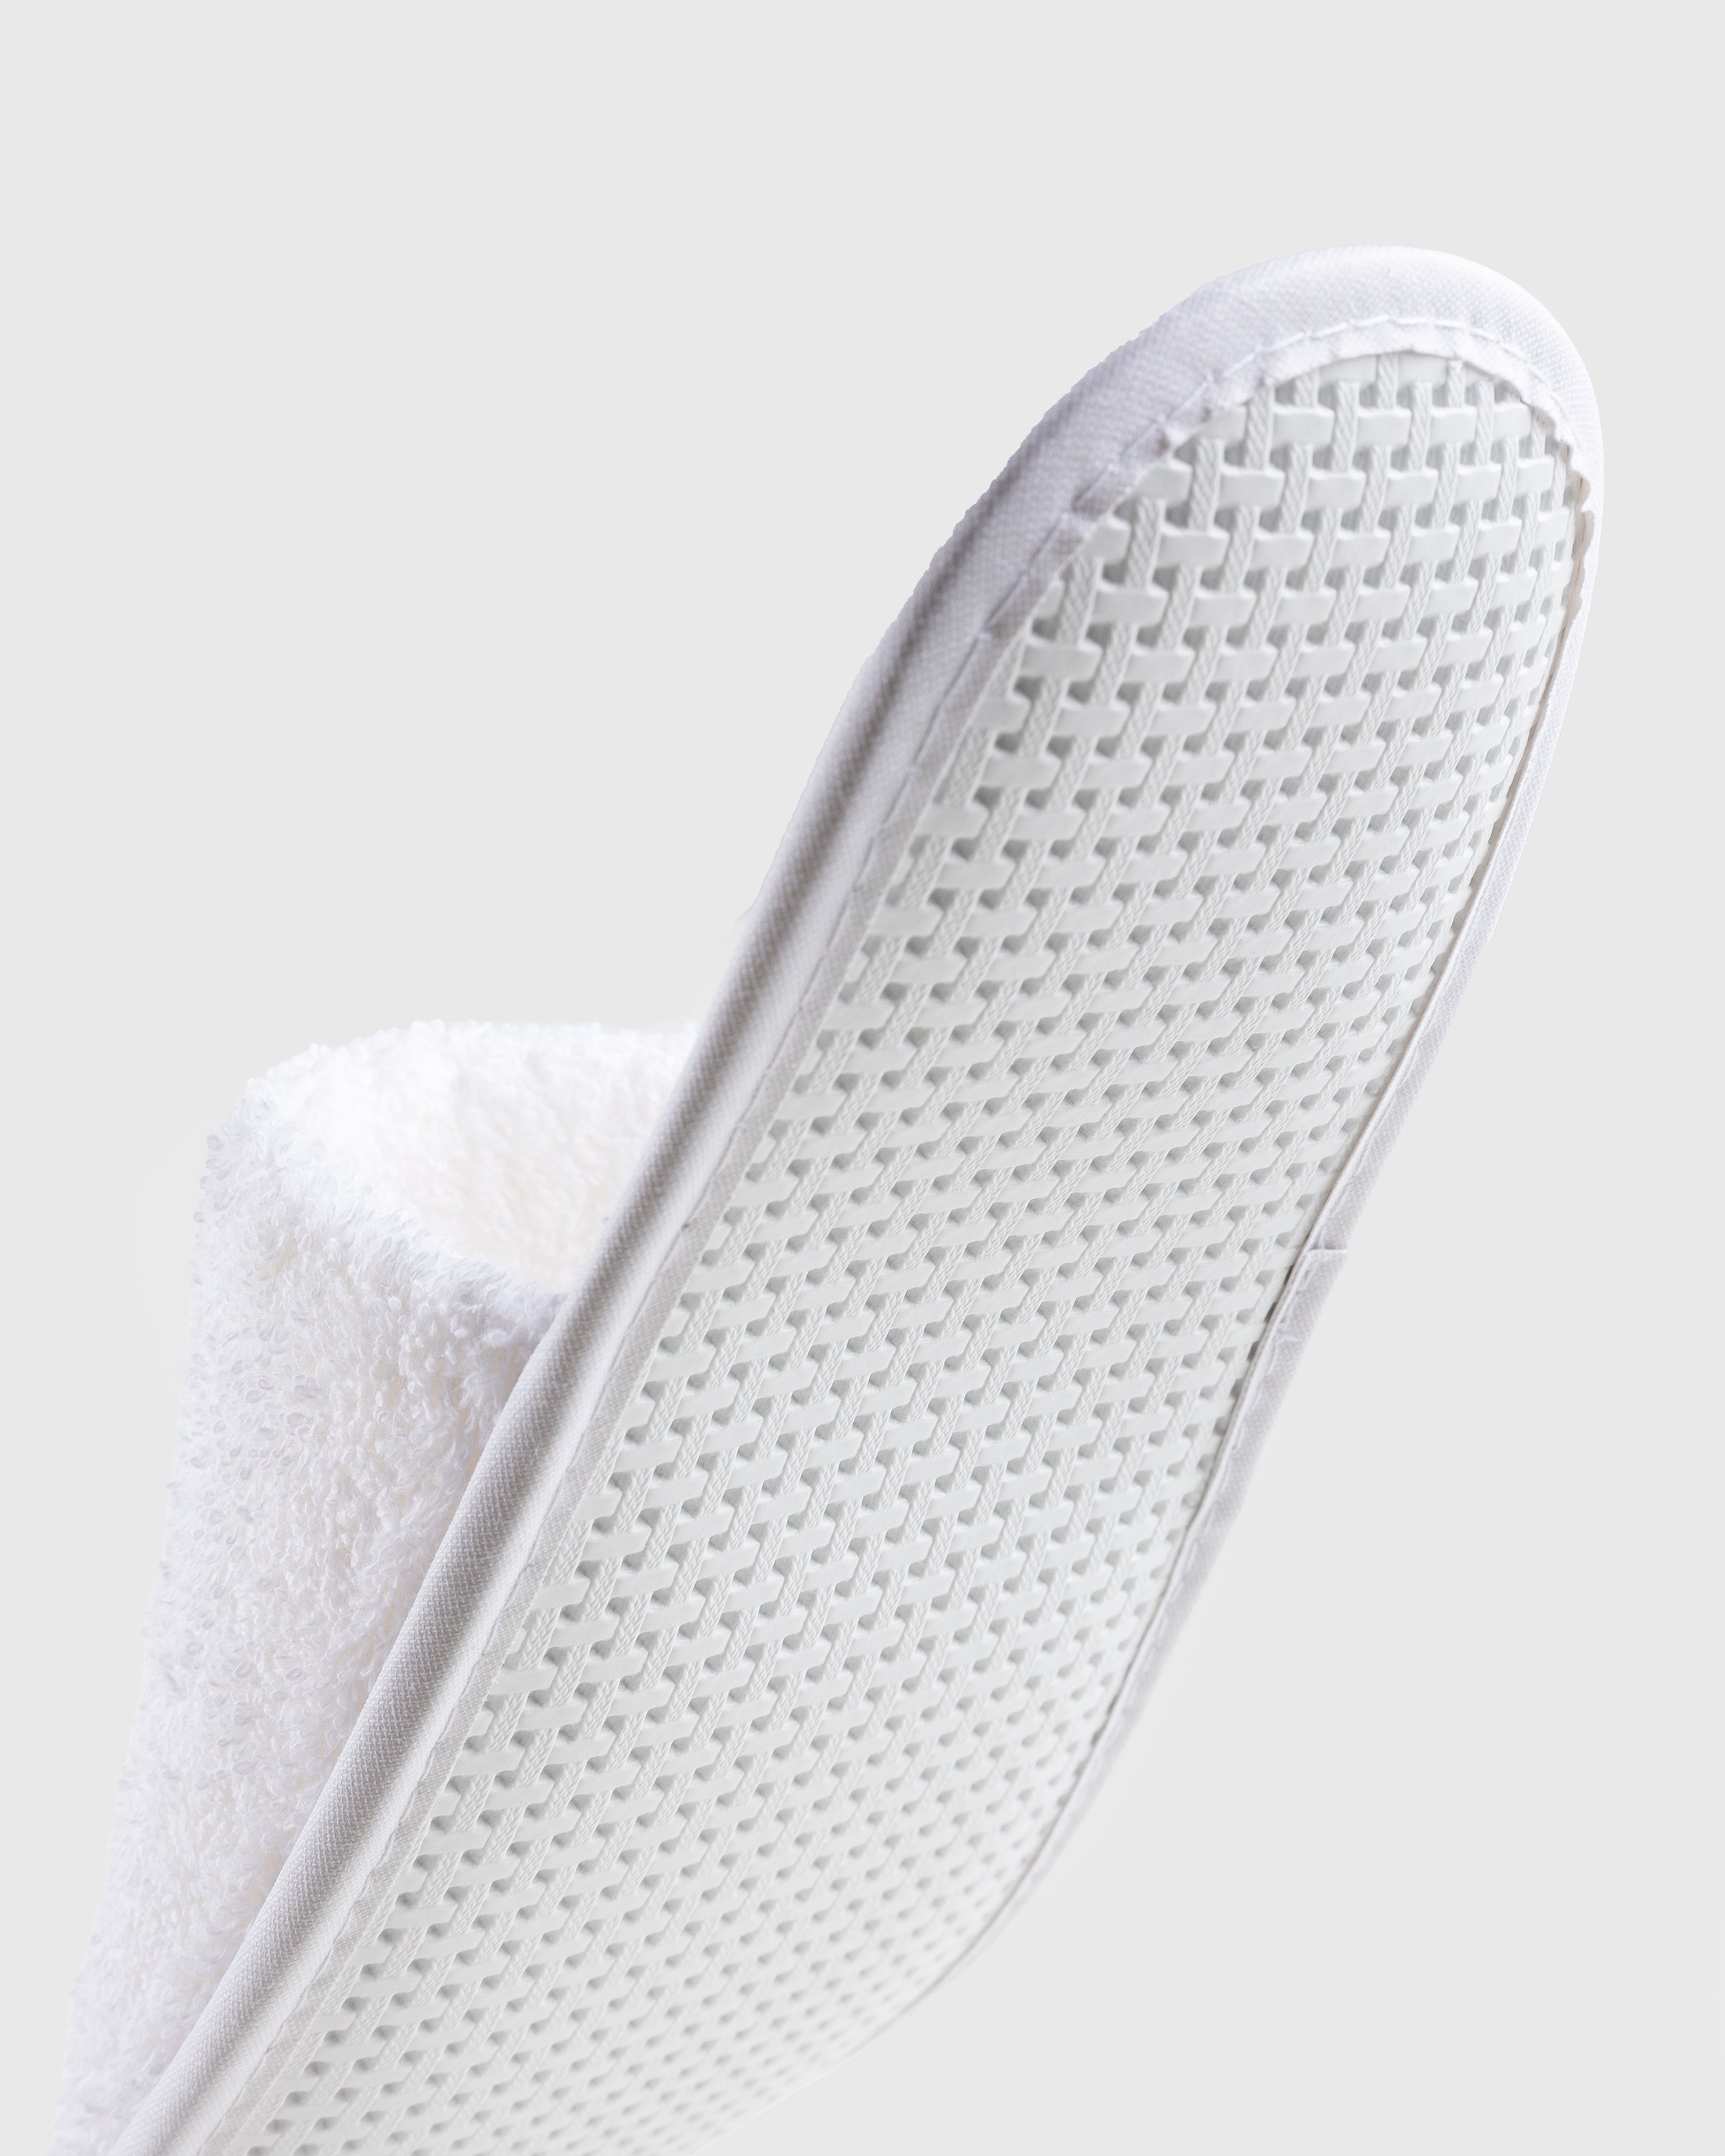 Hotel Amour x Highsnobiety – Not In Paris 4 Slippers White - Sandals - White - Image 6